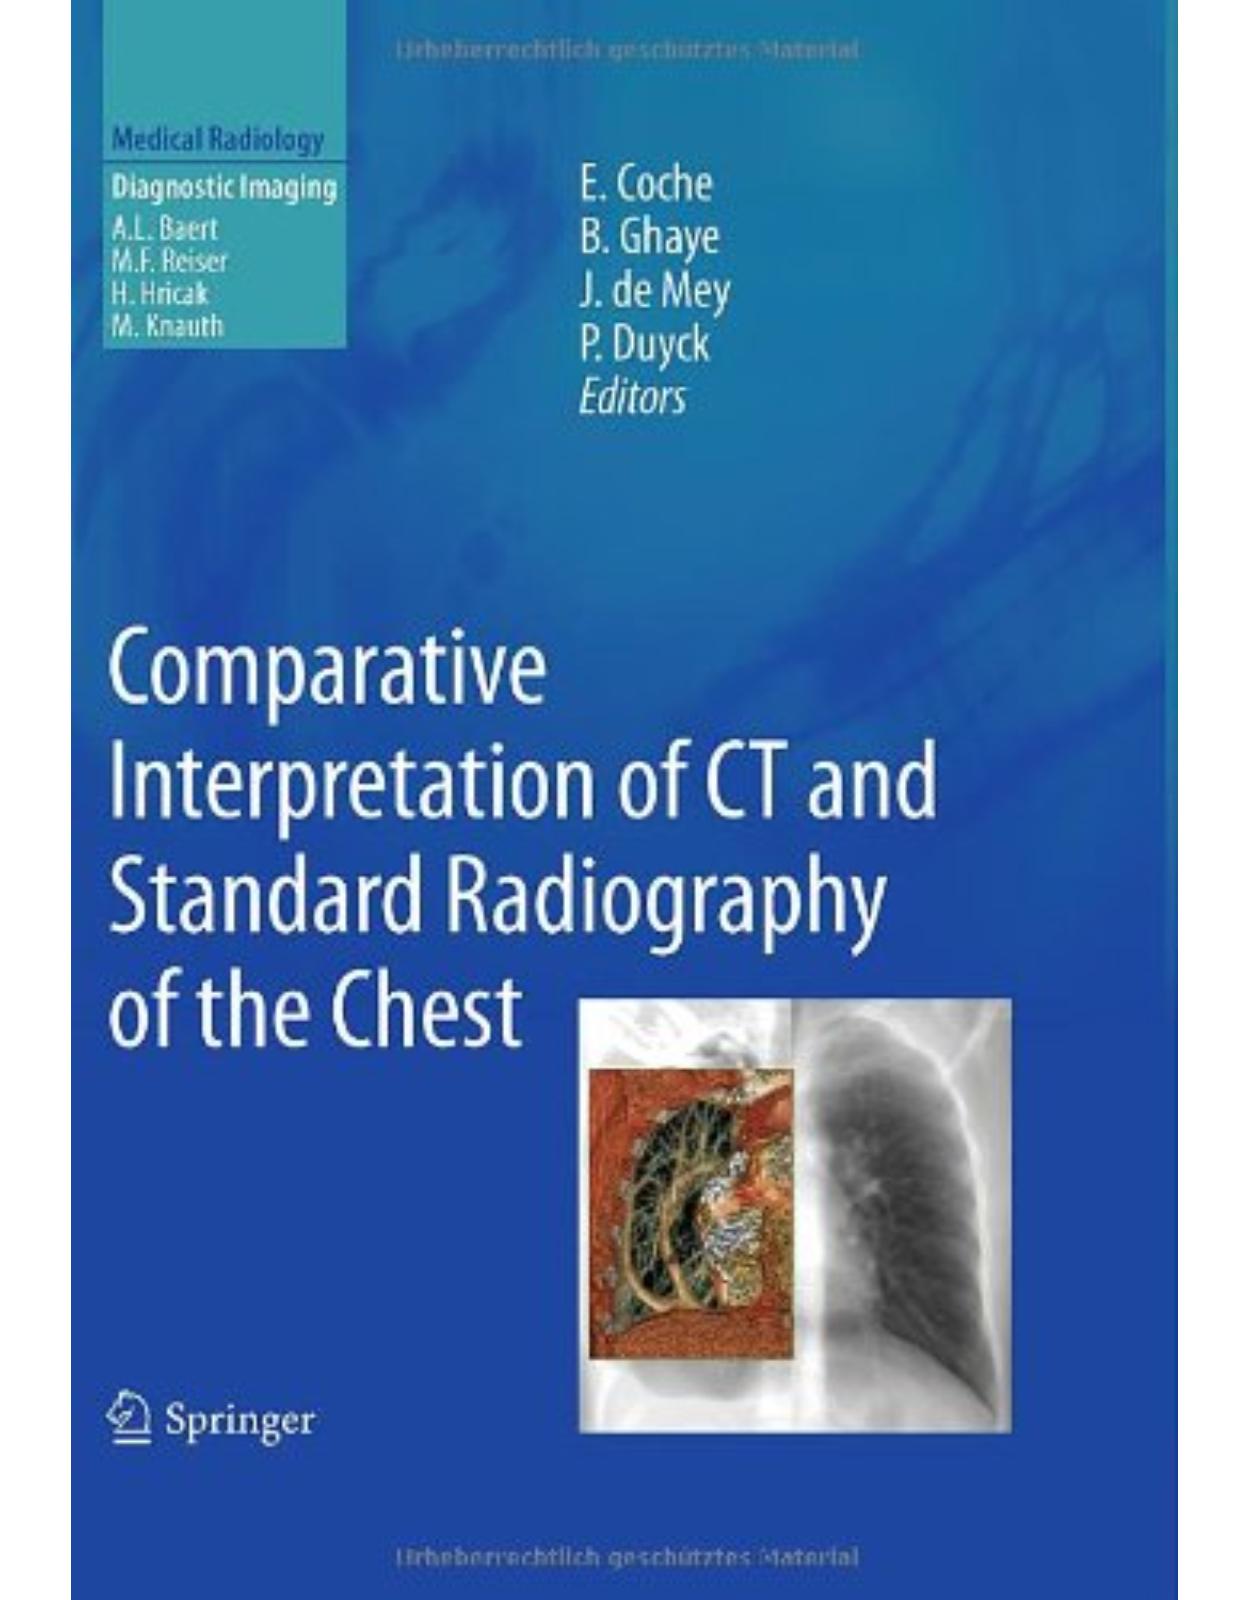 Comparative Interpretation of CT and Standard Radiography of the Chest (Medical Radiology / Diagnostic Imaging)